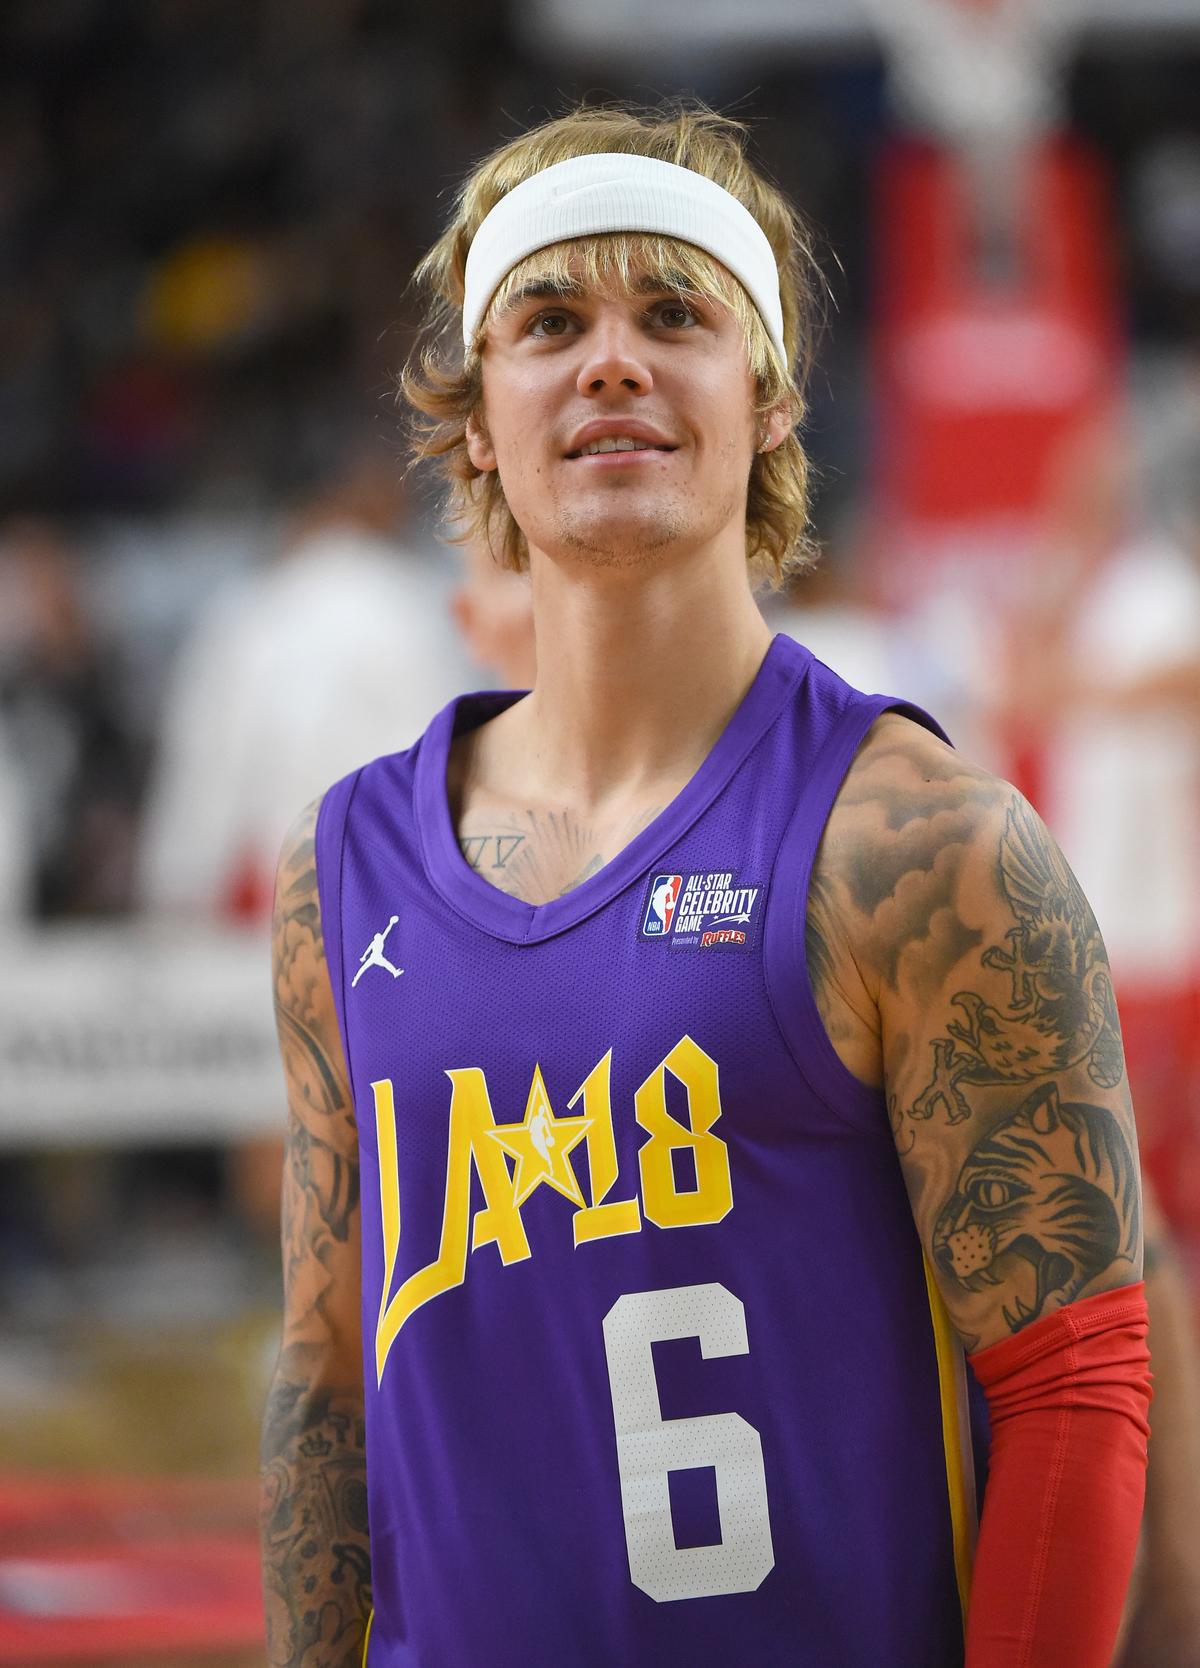 Bieber warms up prior to the 2018 NBA All-Star Celebrity Game at the Los Angeles Convention Center on Feb. 16, 2018. (©Getty Images | <a href="https://www.gettyimages.com/detail/news-photo/justin-bieber-warms-up-prior-to-the-2018-nba-all-star-game-news-photo/919128718?adppopup=true">Jayne Kamin-Oncea</a>)